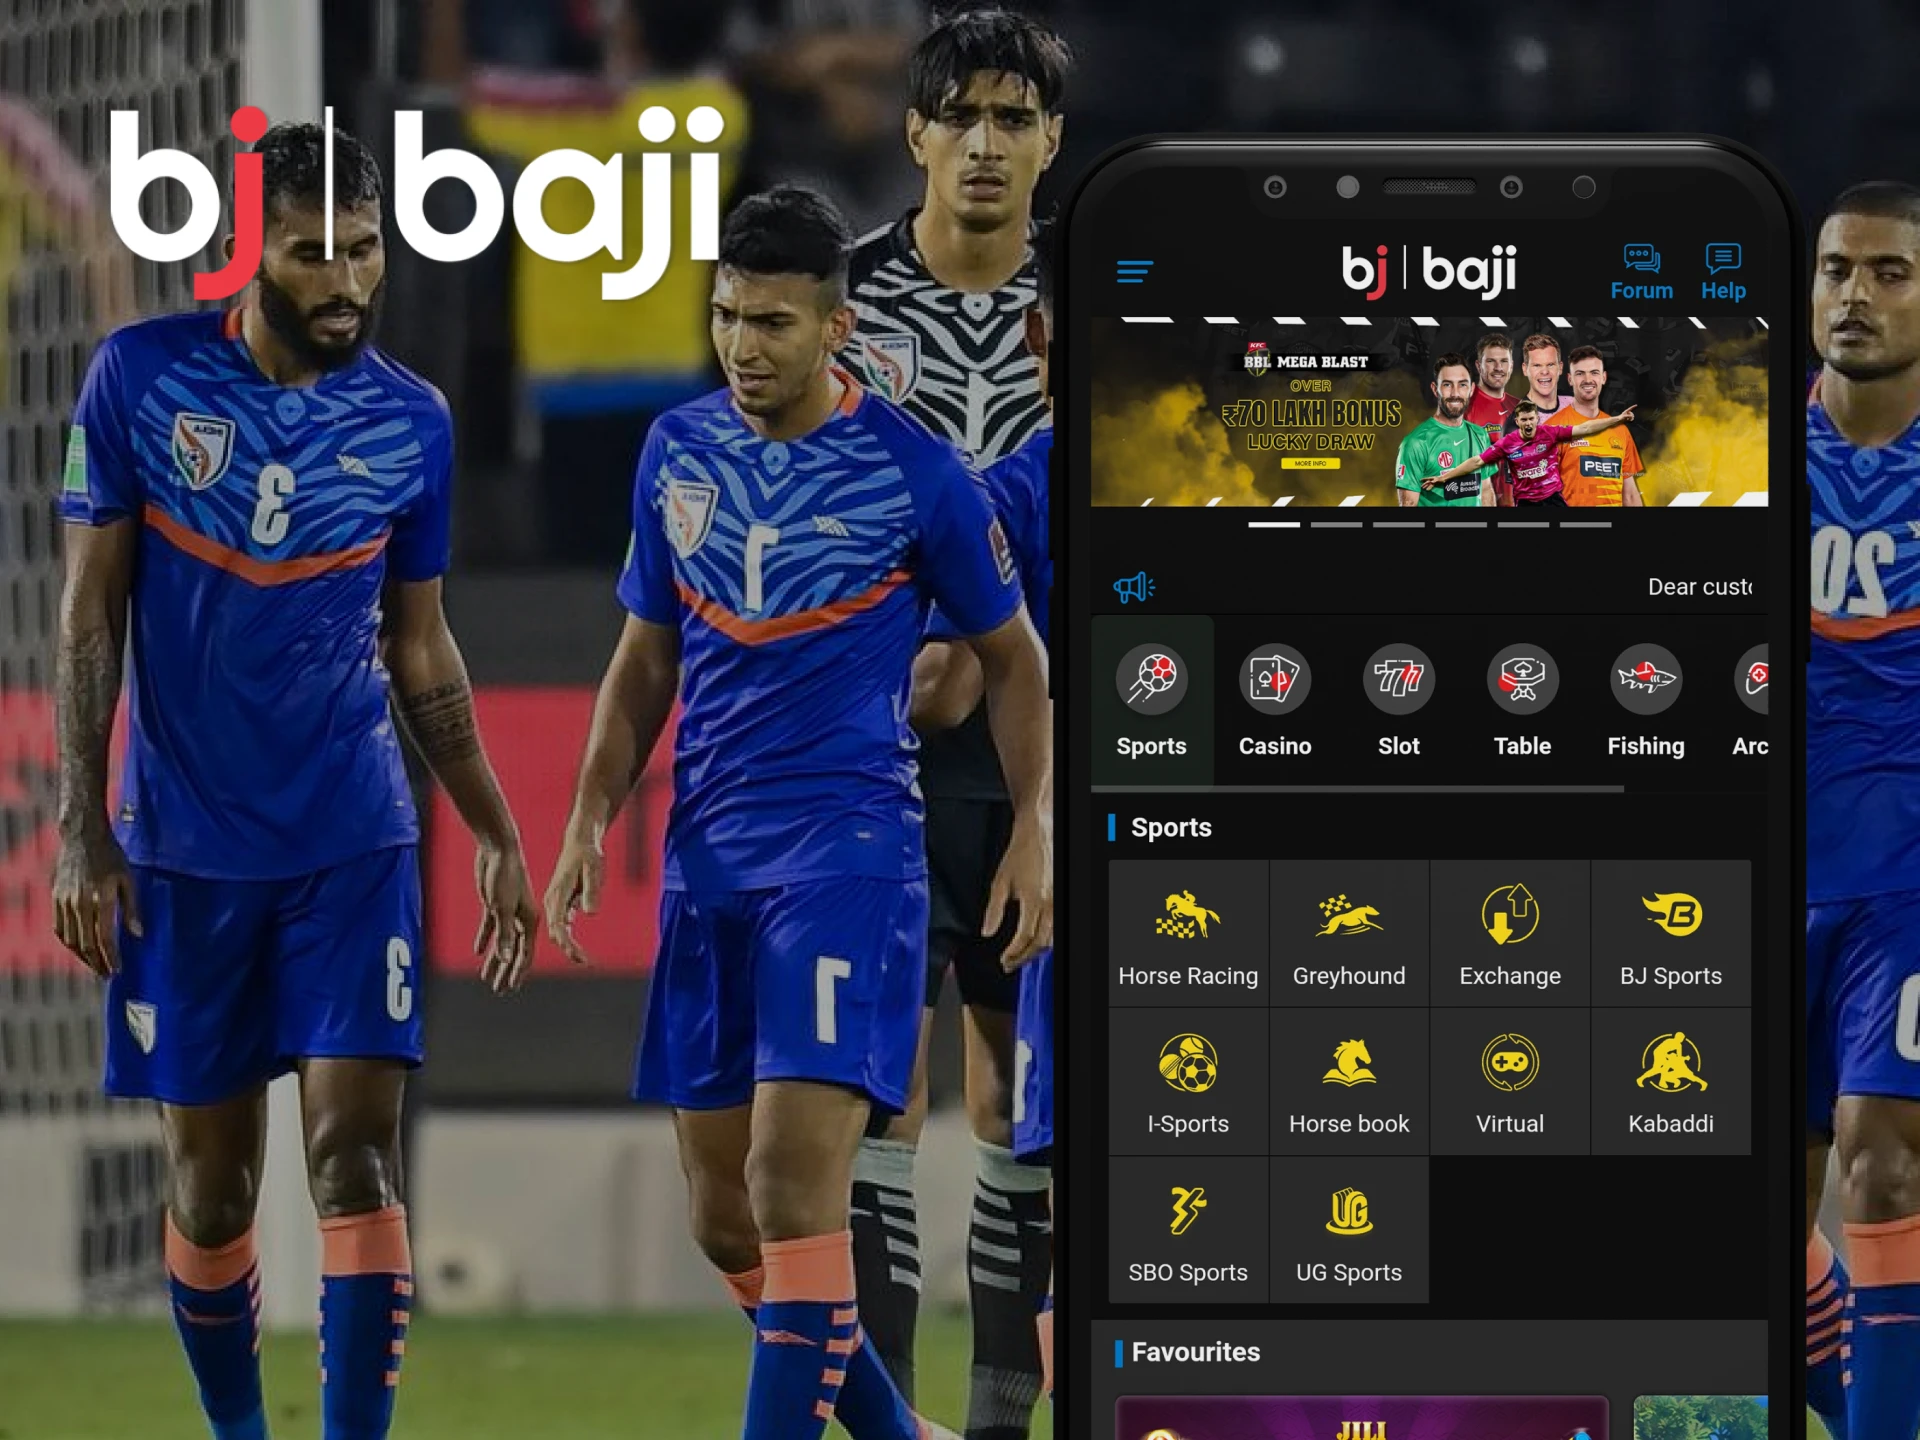 Bet on sports events with Baji Live.